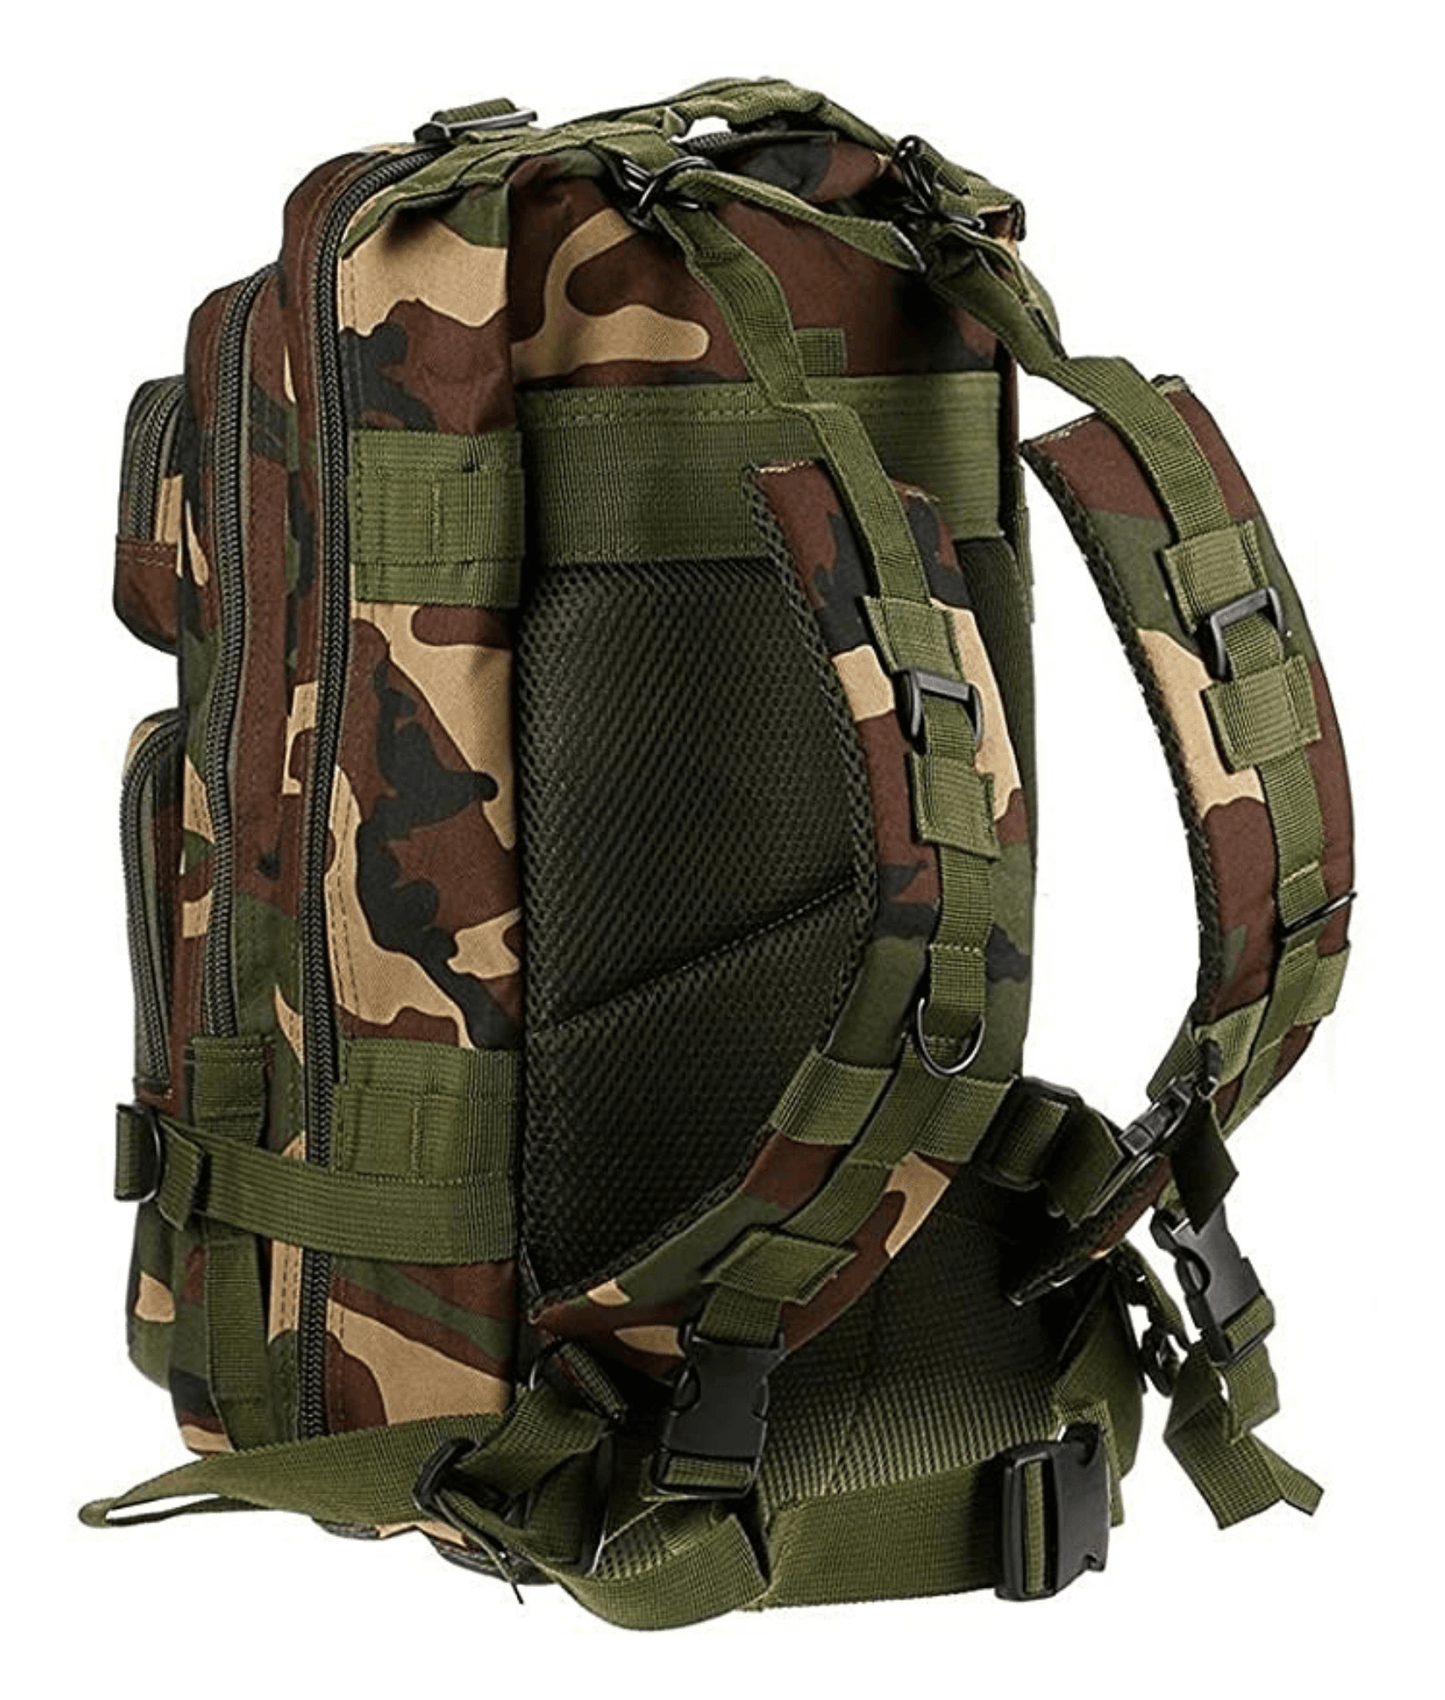 Tactical Military 25L Molle Backpack by Jupiter Gear